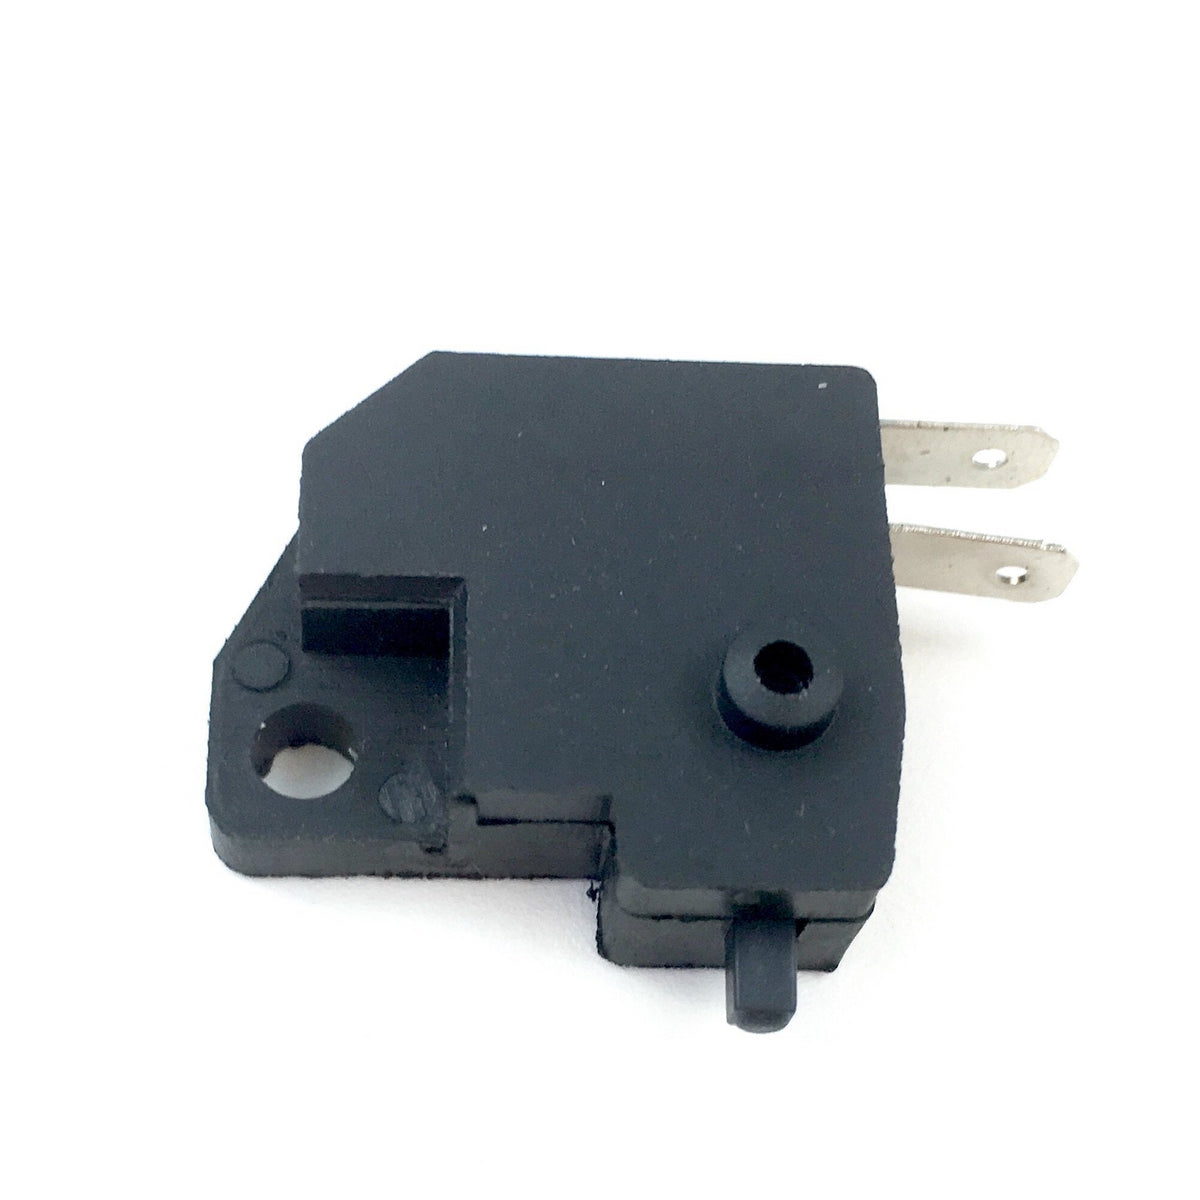 Front Brake Light Switch - For Hydraulic Nissin And Spaq Master